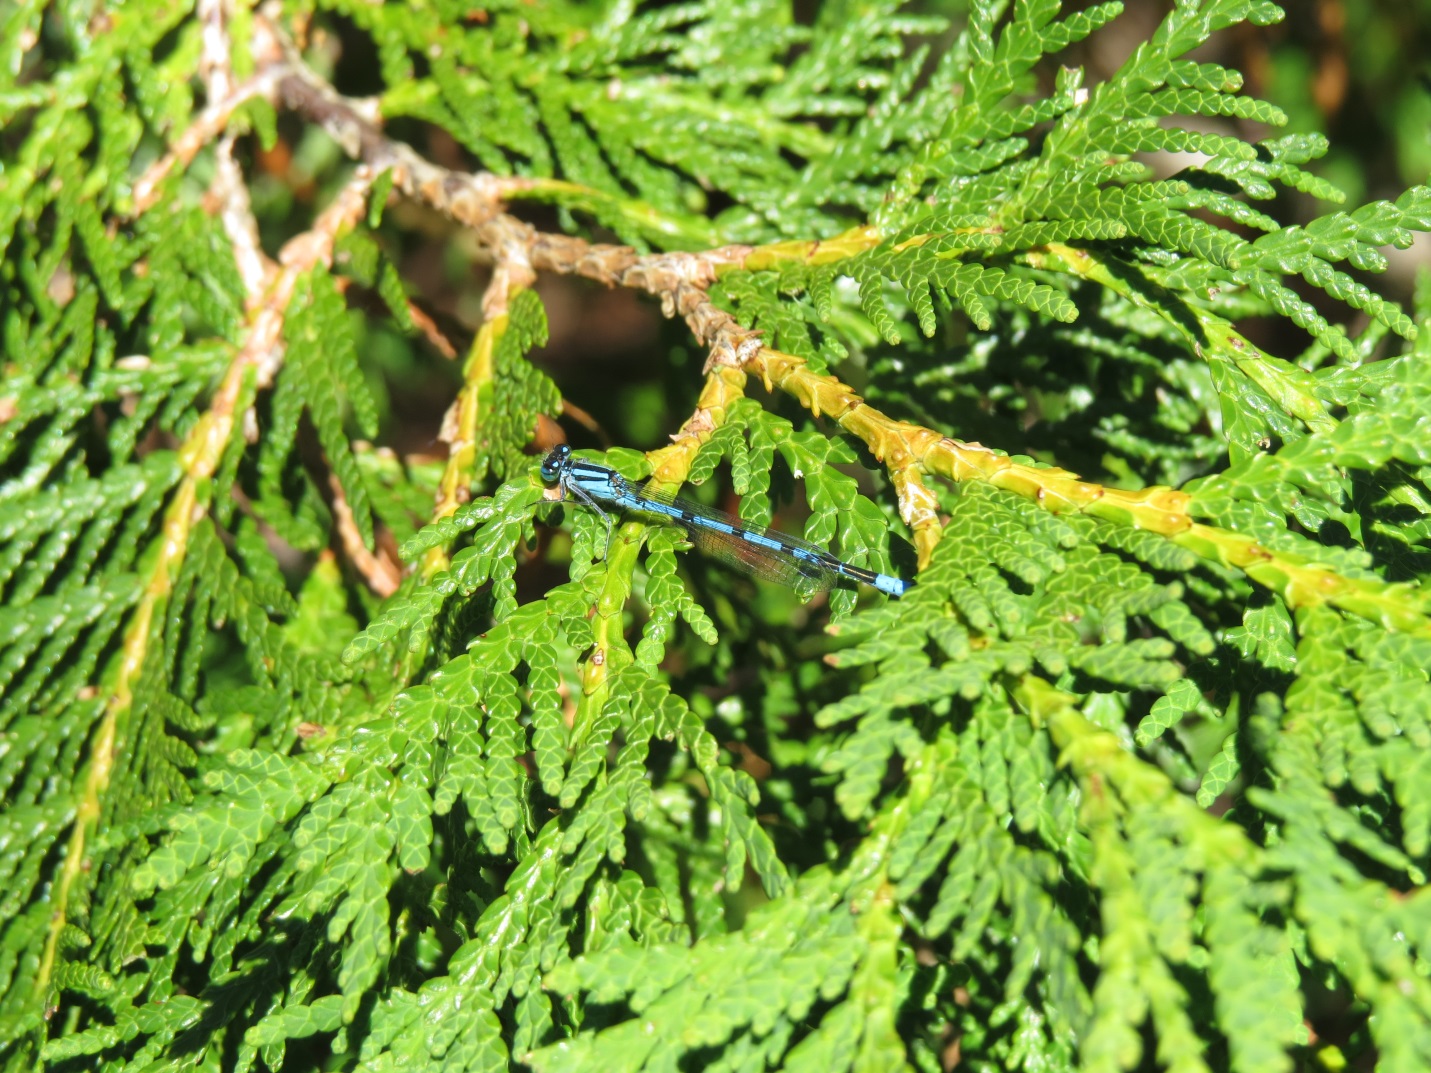 An adult damselfly found on vegetation around one of the bogs we sampled at Bruce Peninsula National Park. 